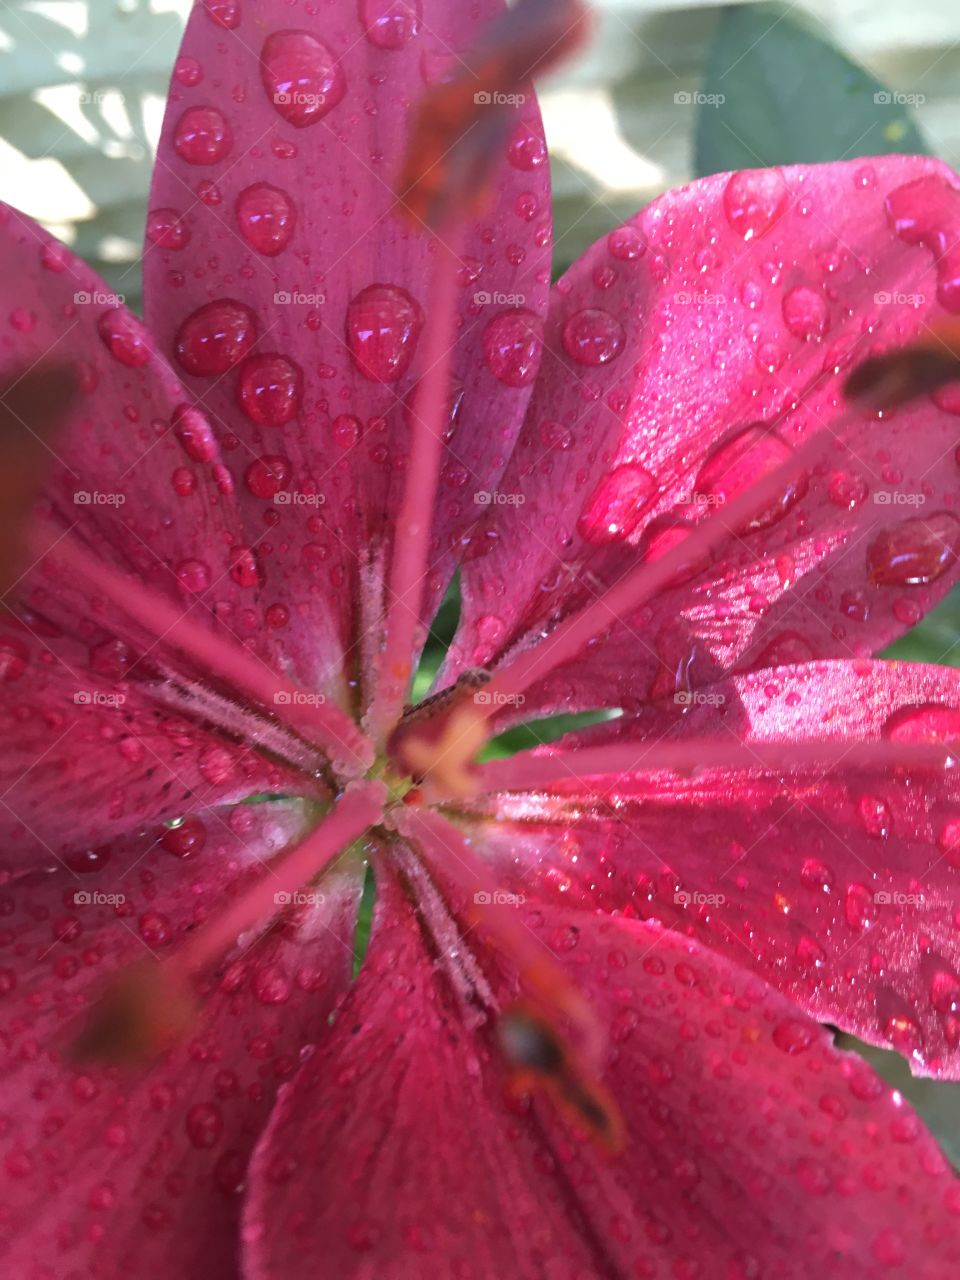 Took a close up of this day lily just after a rain we had last week so you could see the droplets.